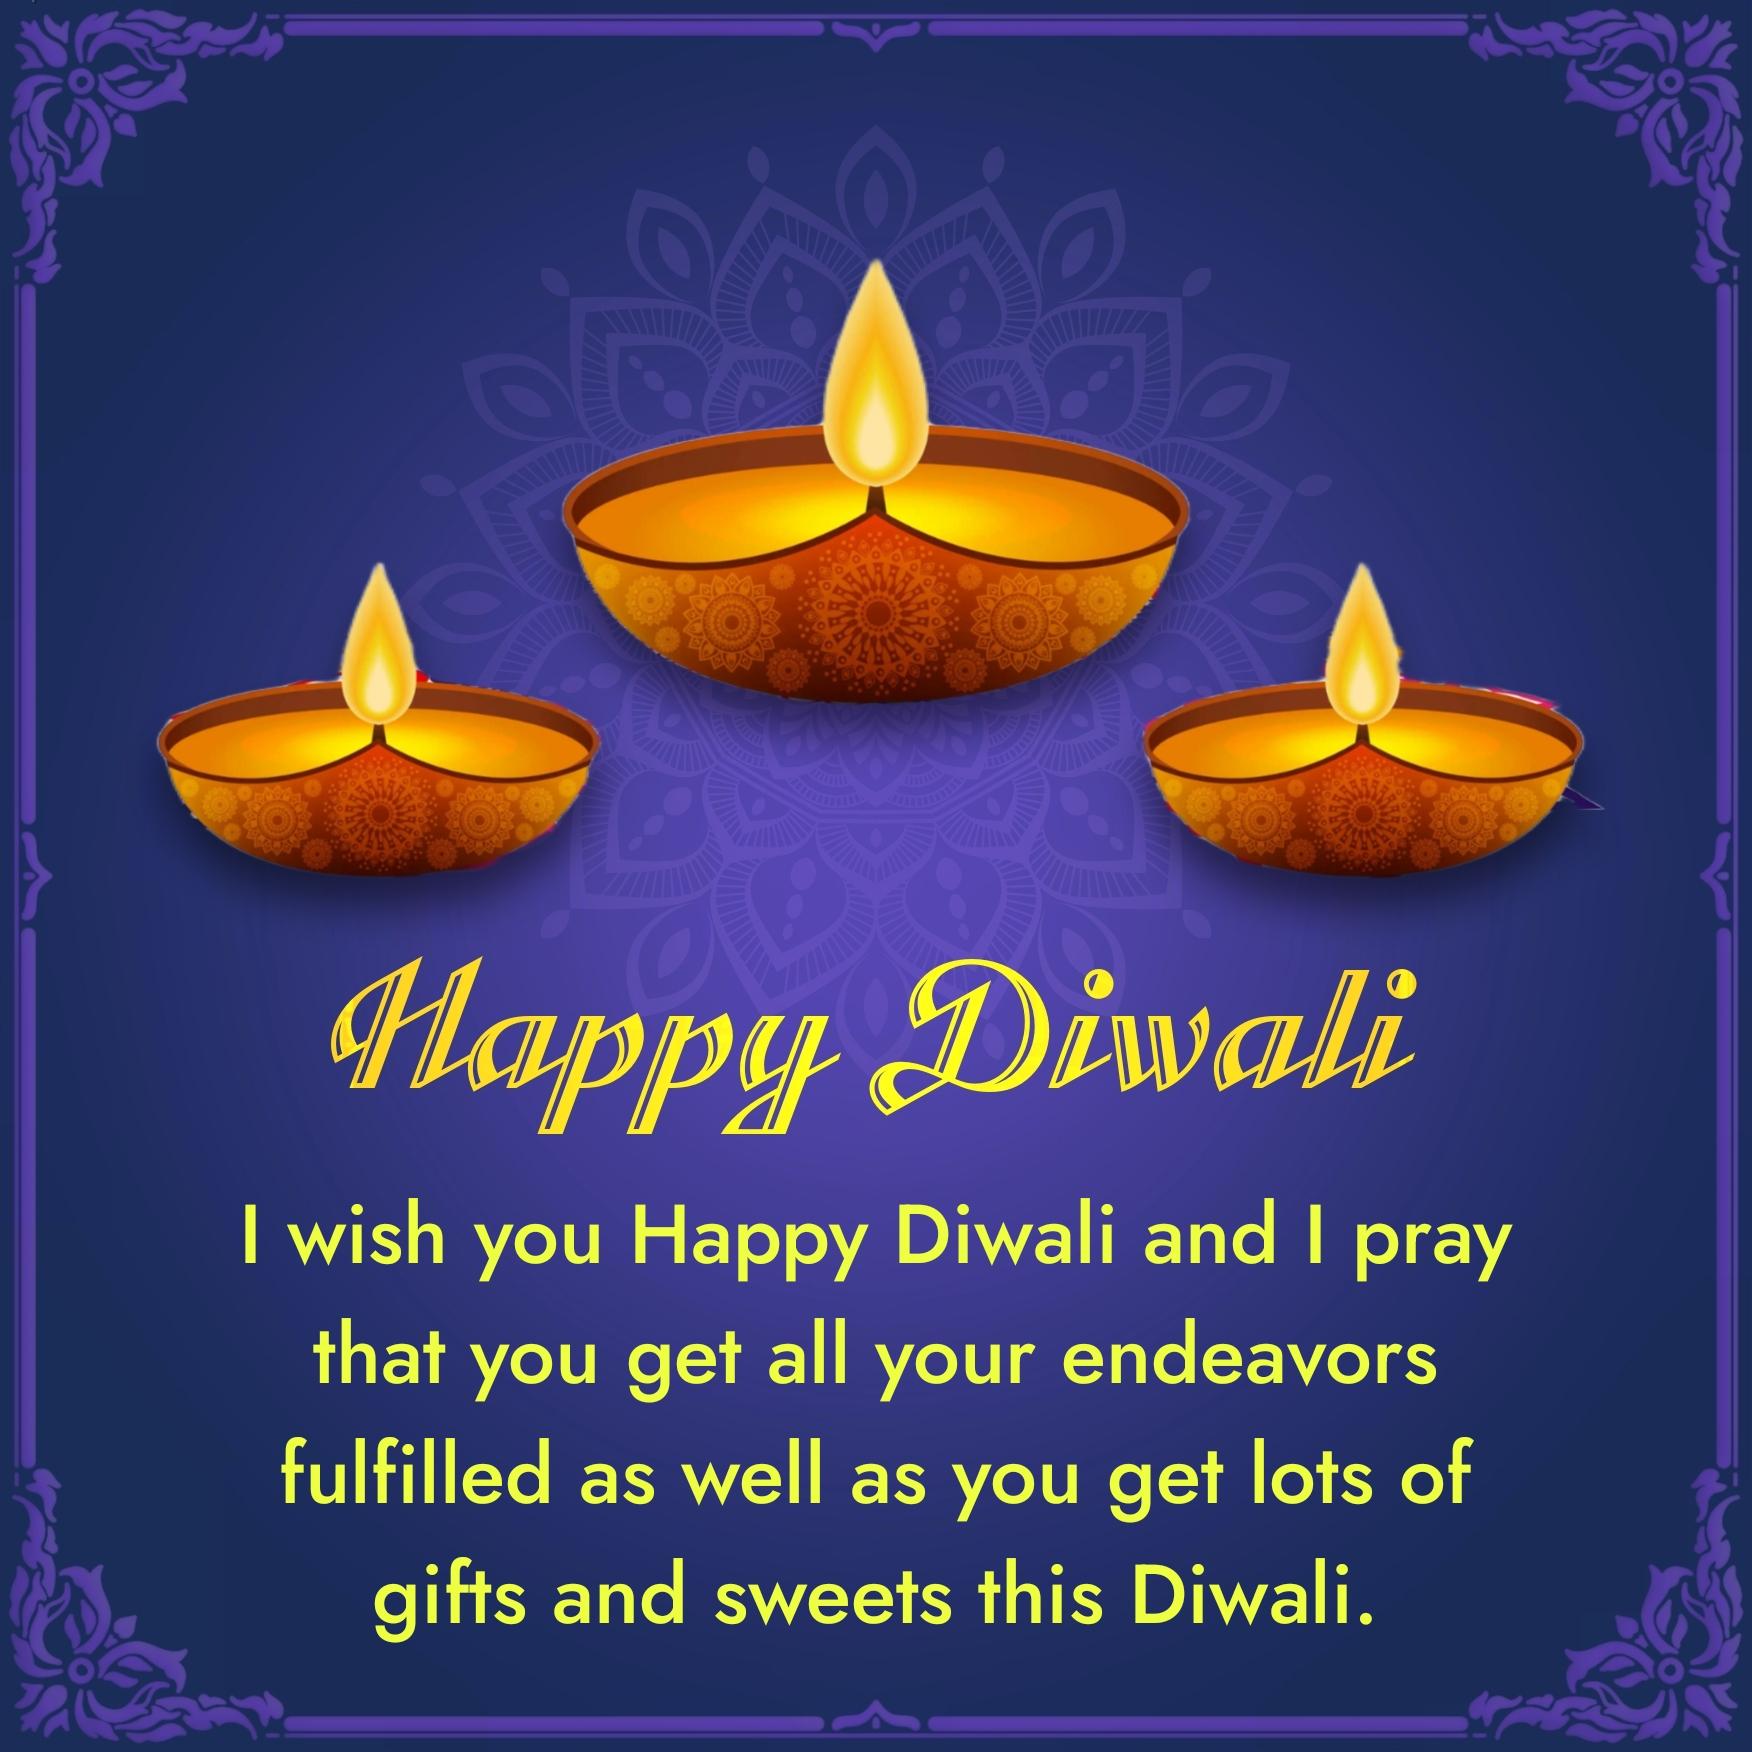 I wish you Happy Diwali and I pray that you get all your endeavors fulfilled